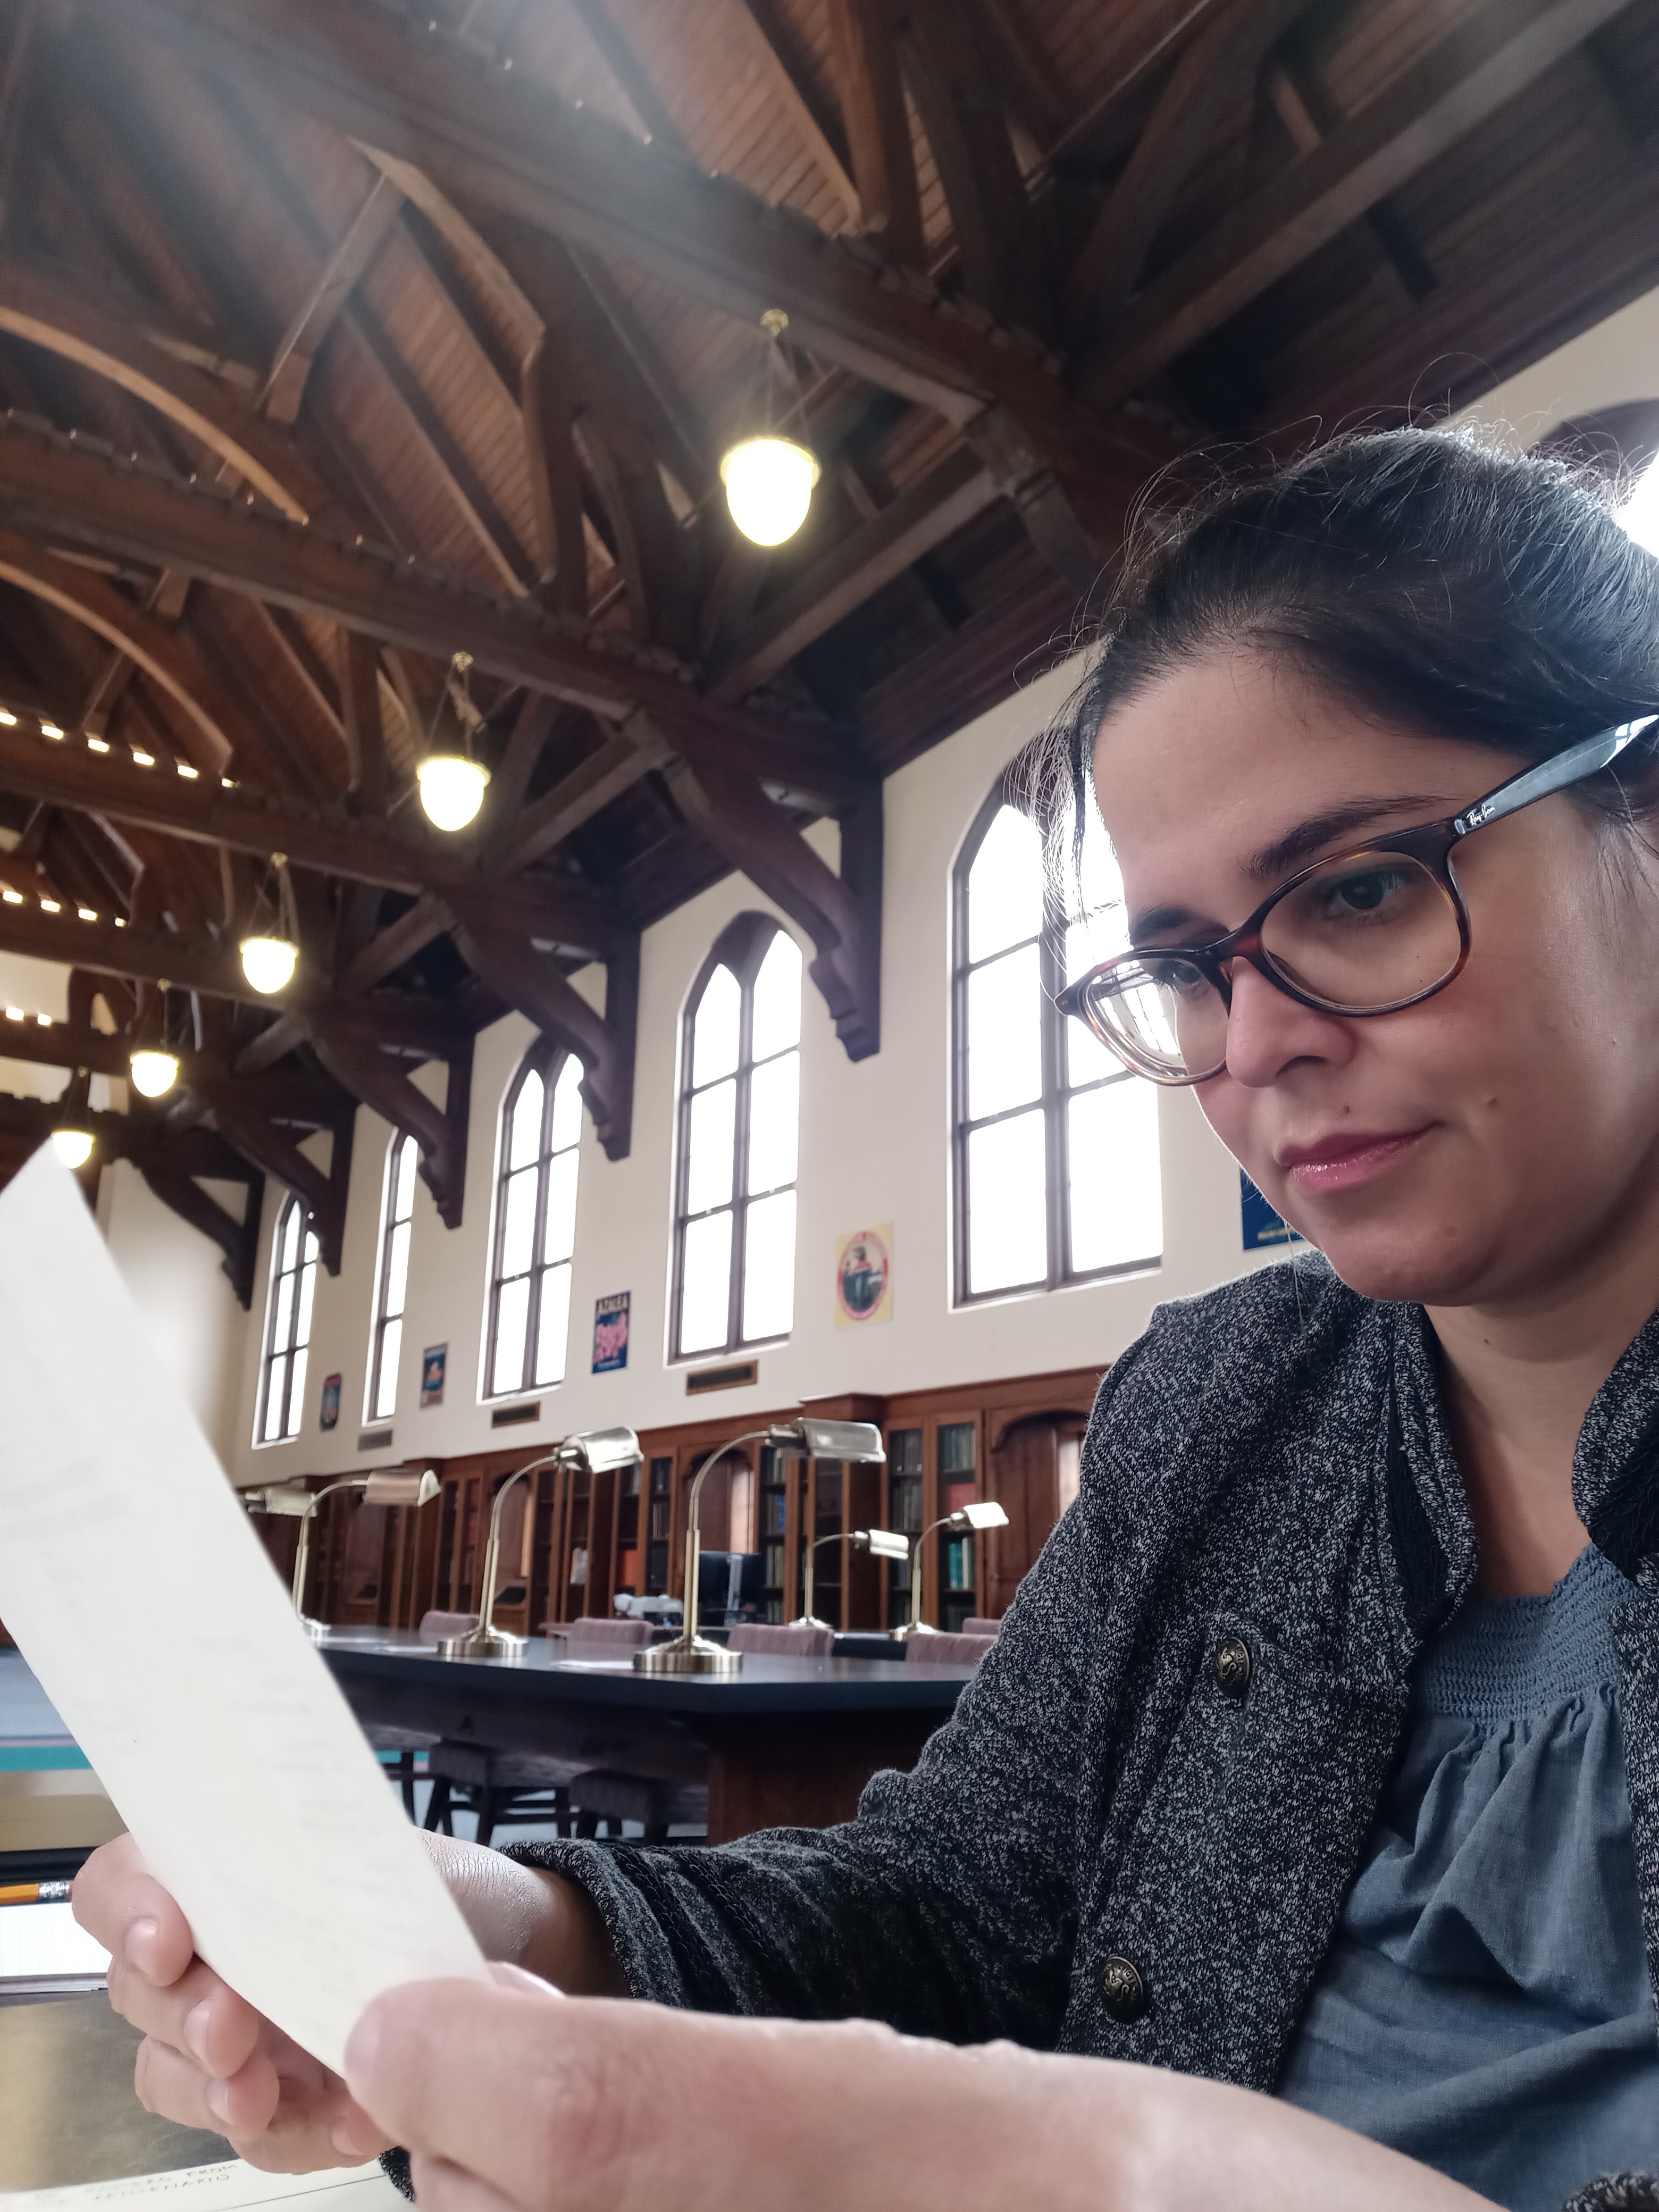 Elizabeth Mirabal, Ph.D. Student in the Department of Spanish at UVA, conducting research in the reading room of Special Collections, Smathers Library, University of Florida.